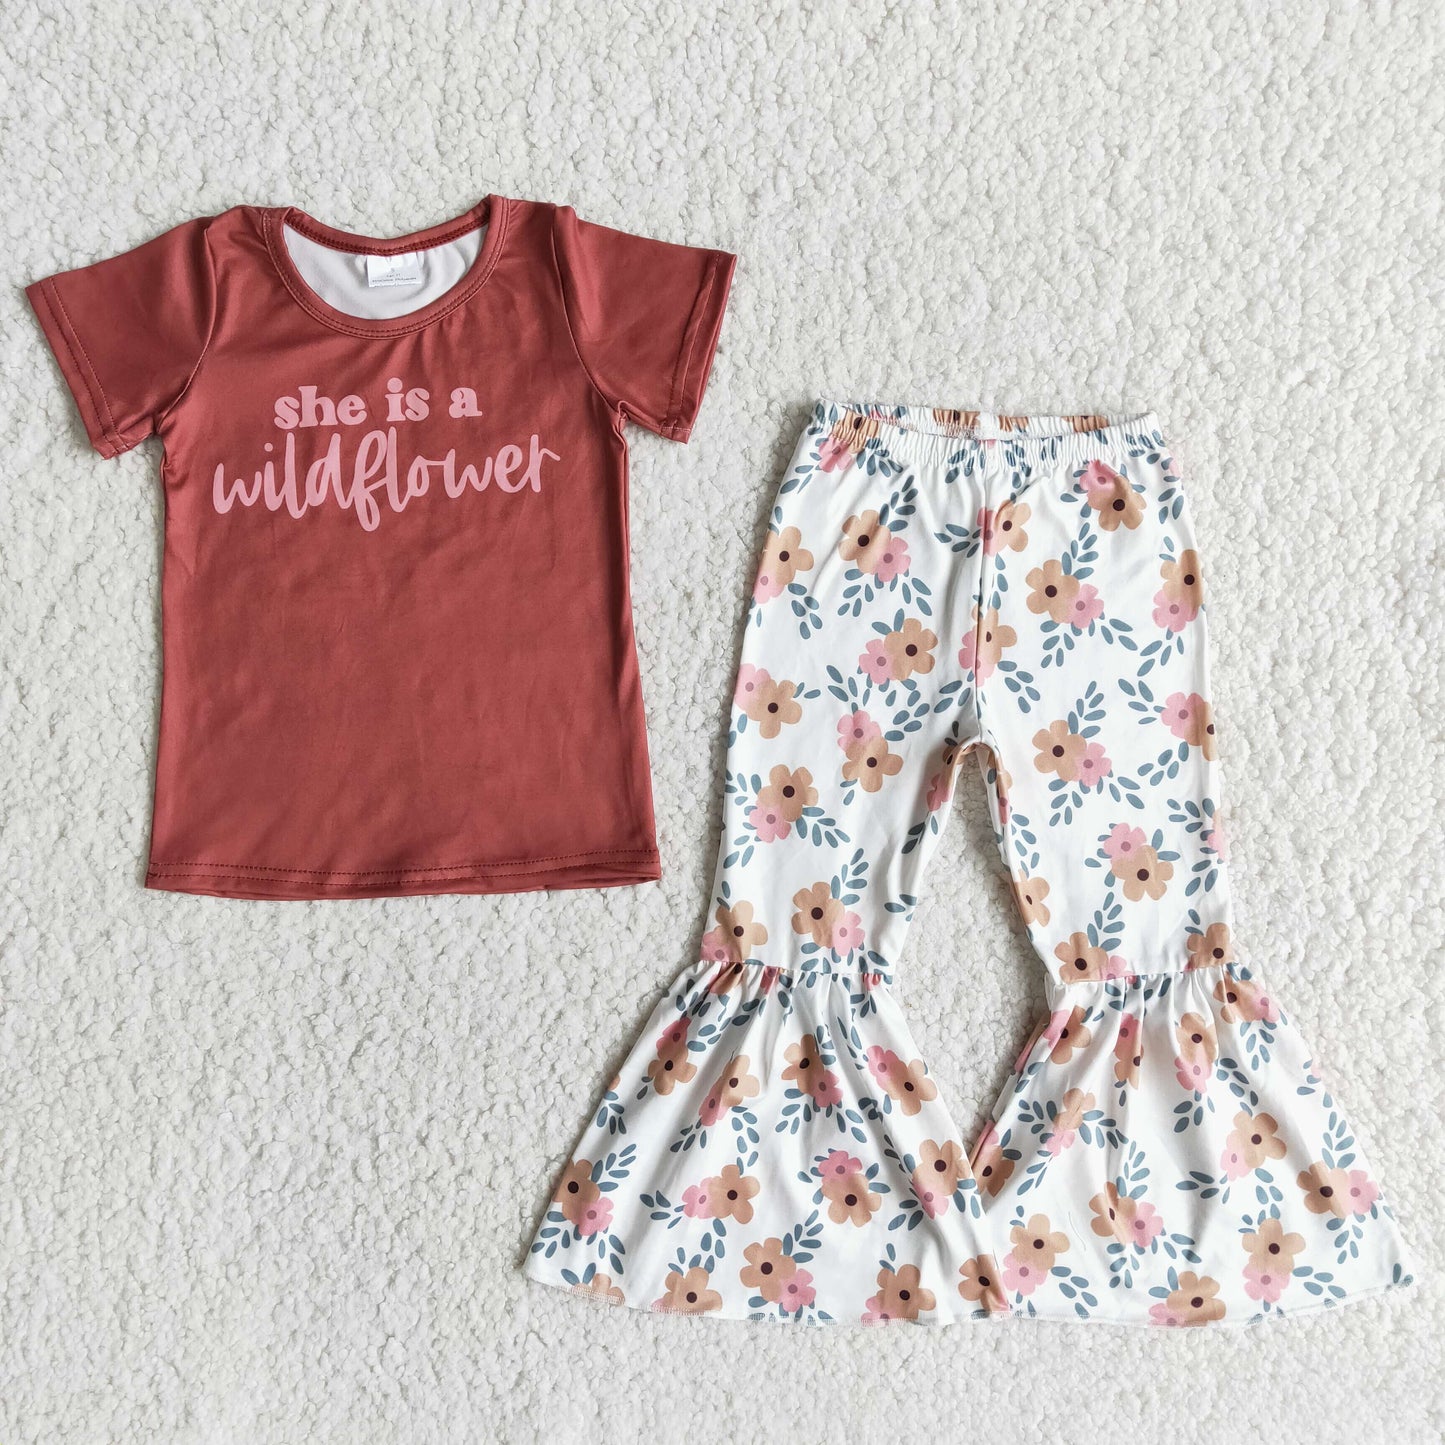 She is a wildflower baby girls summer outfit